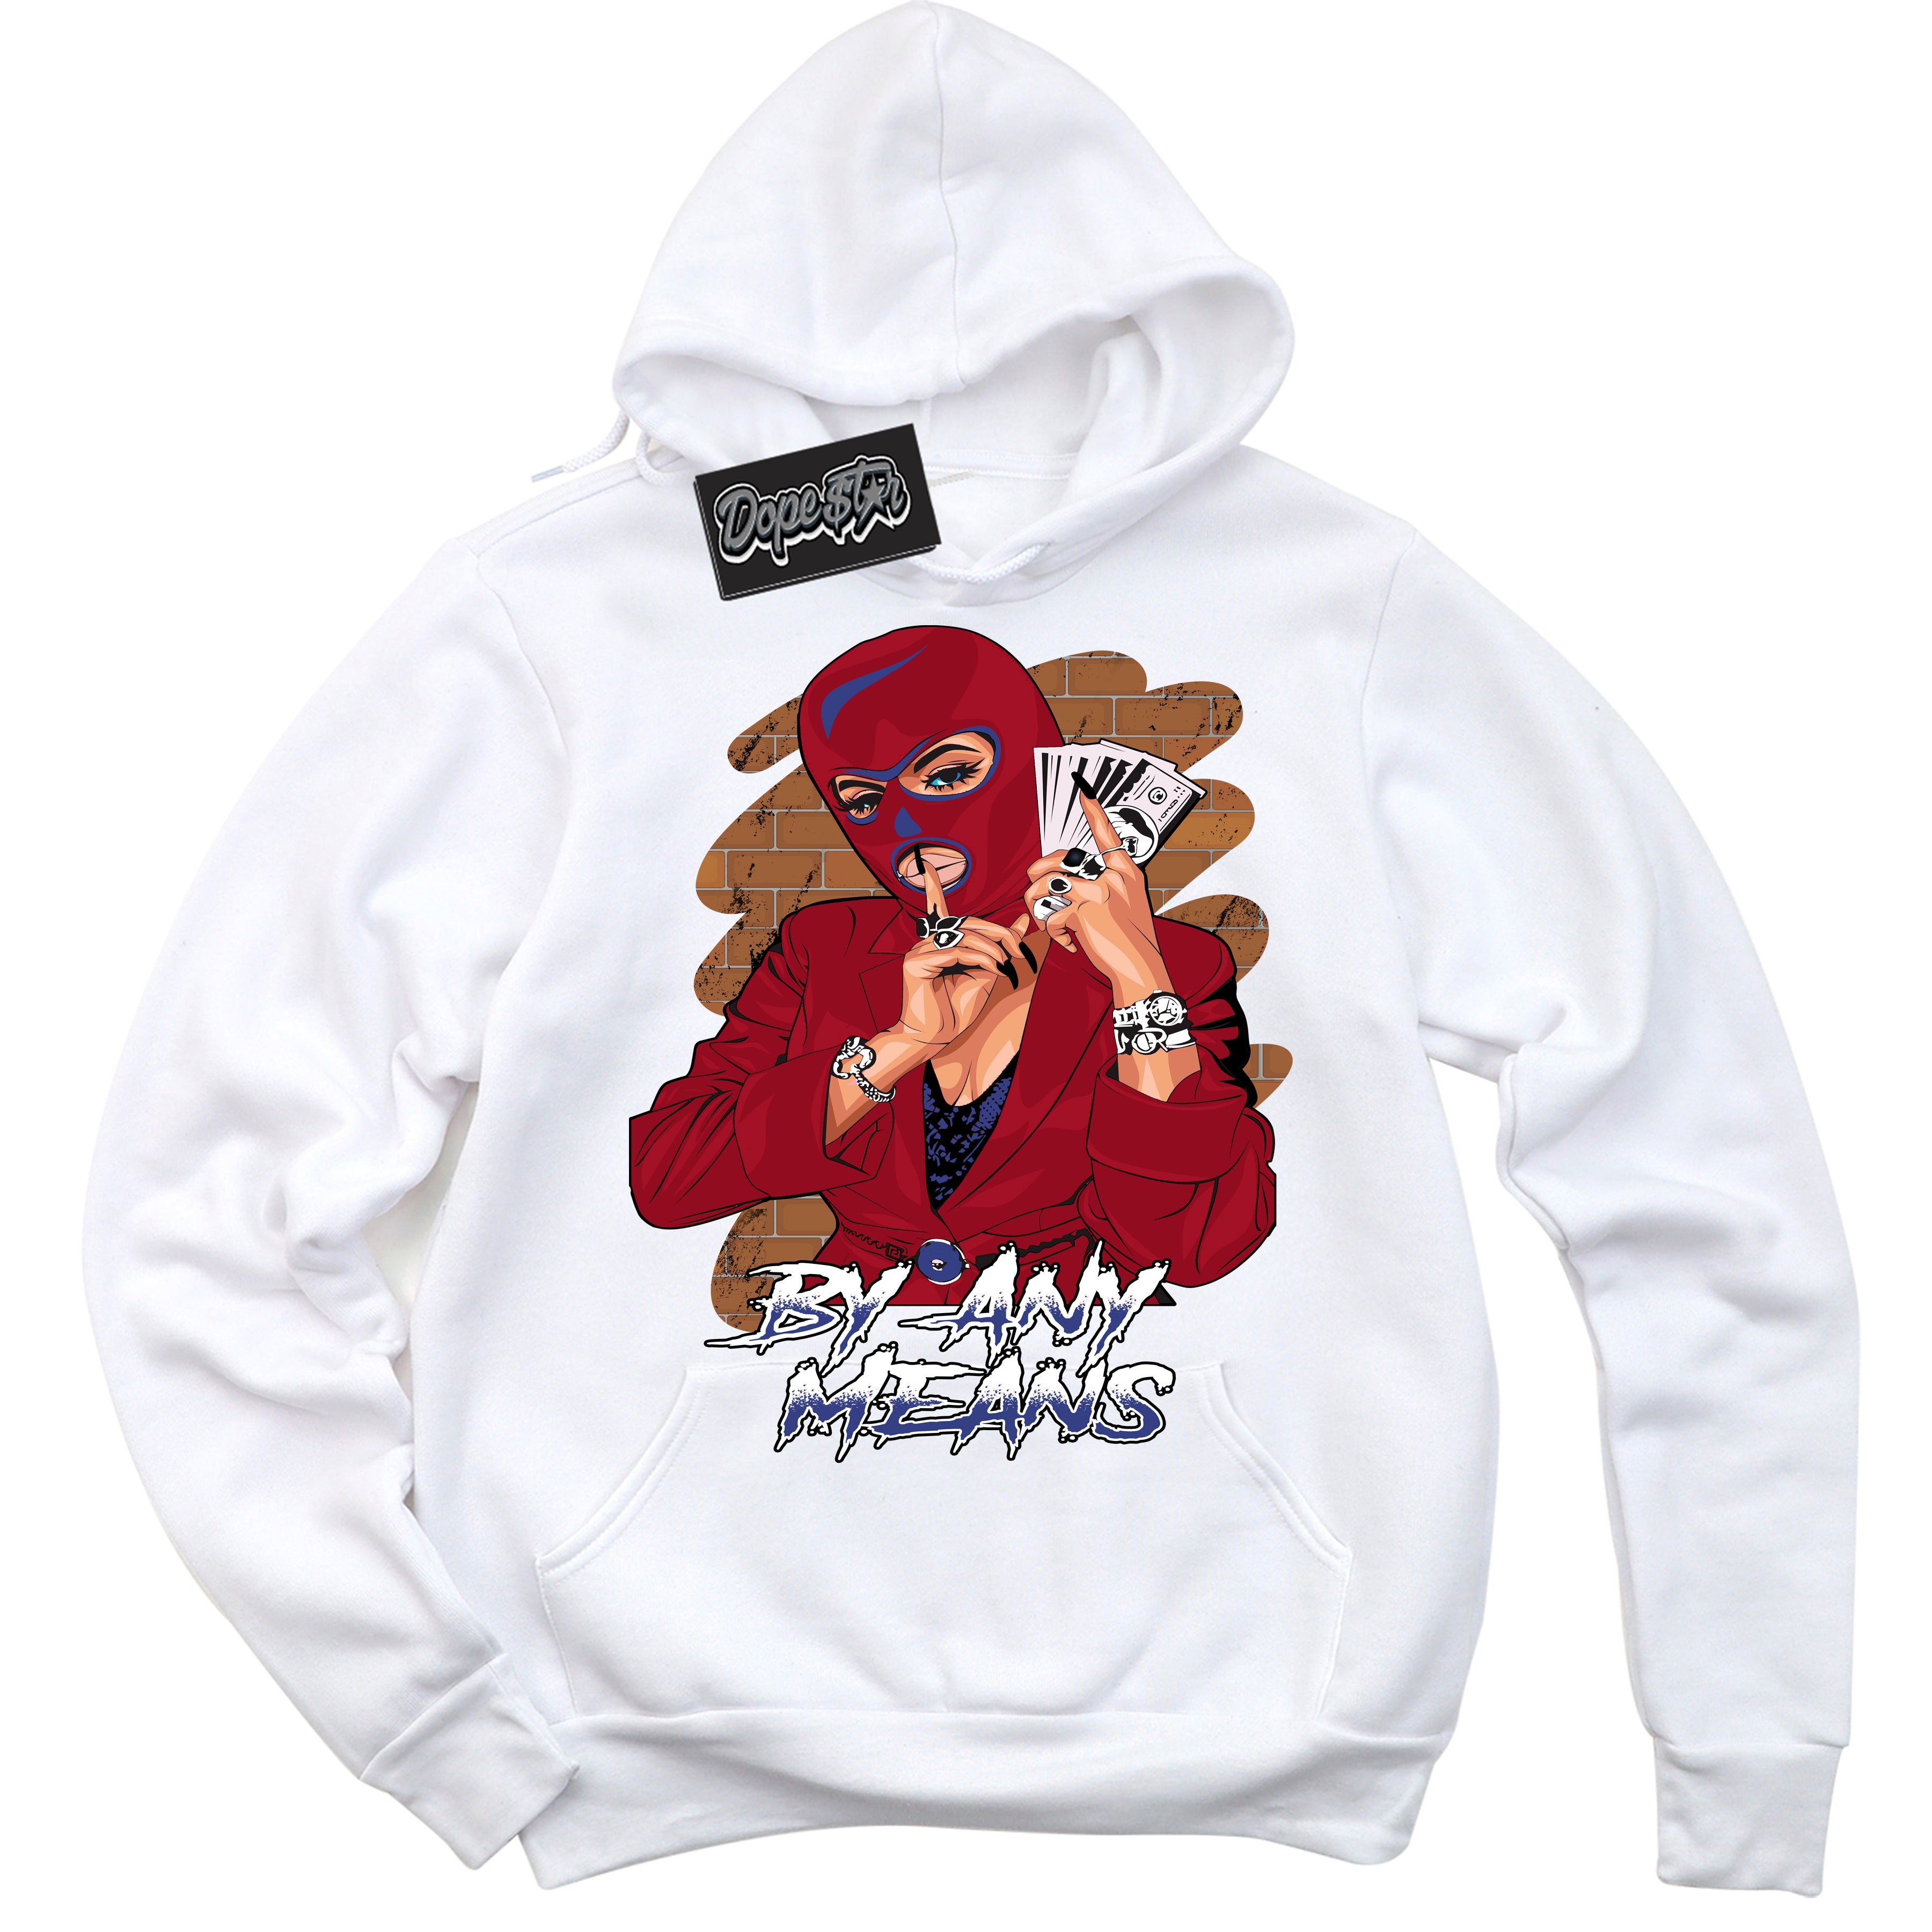 Cool White Hoodie with “ By Any Means ”  design that Perfectly Matches Playoffs 8s Sneakers.